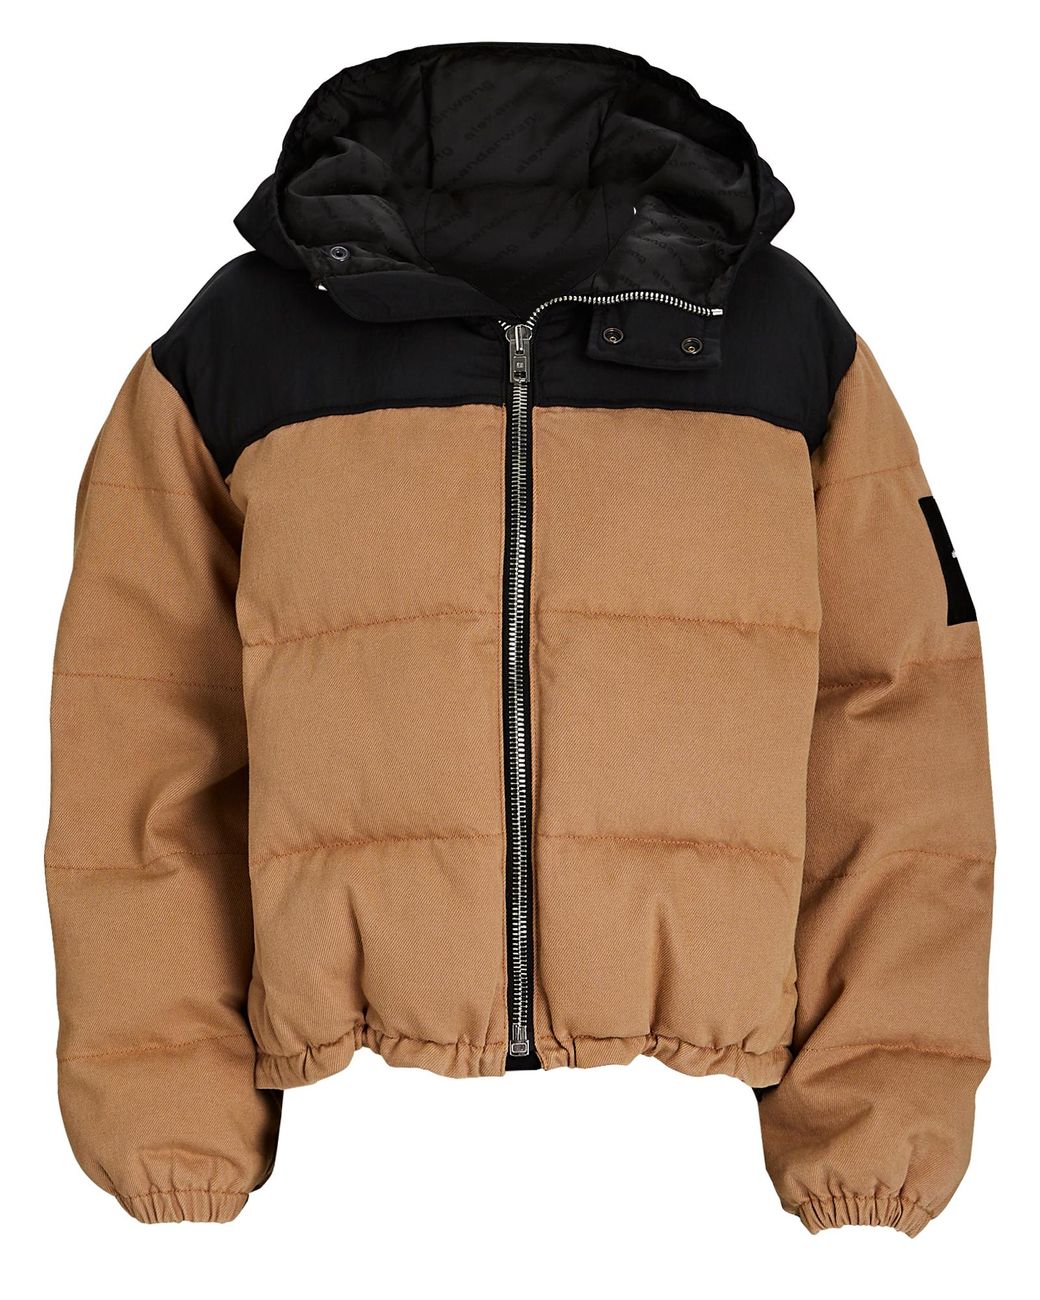 Alexander Wang Colorblock Hooded Puffer Jacket in Natural | Lyst